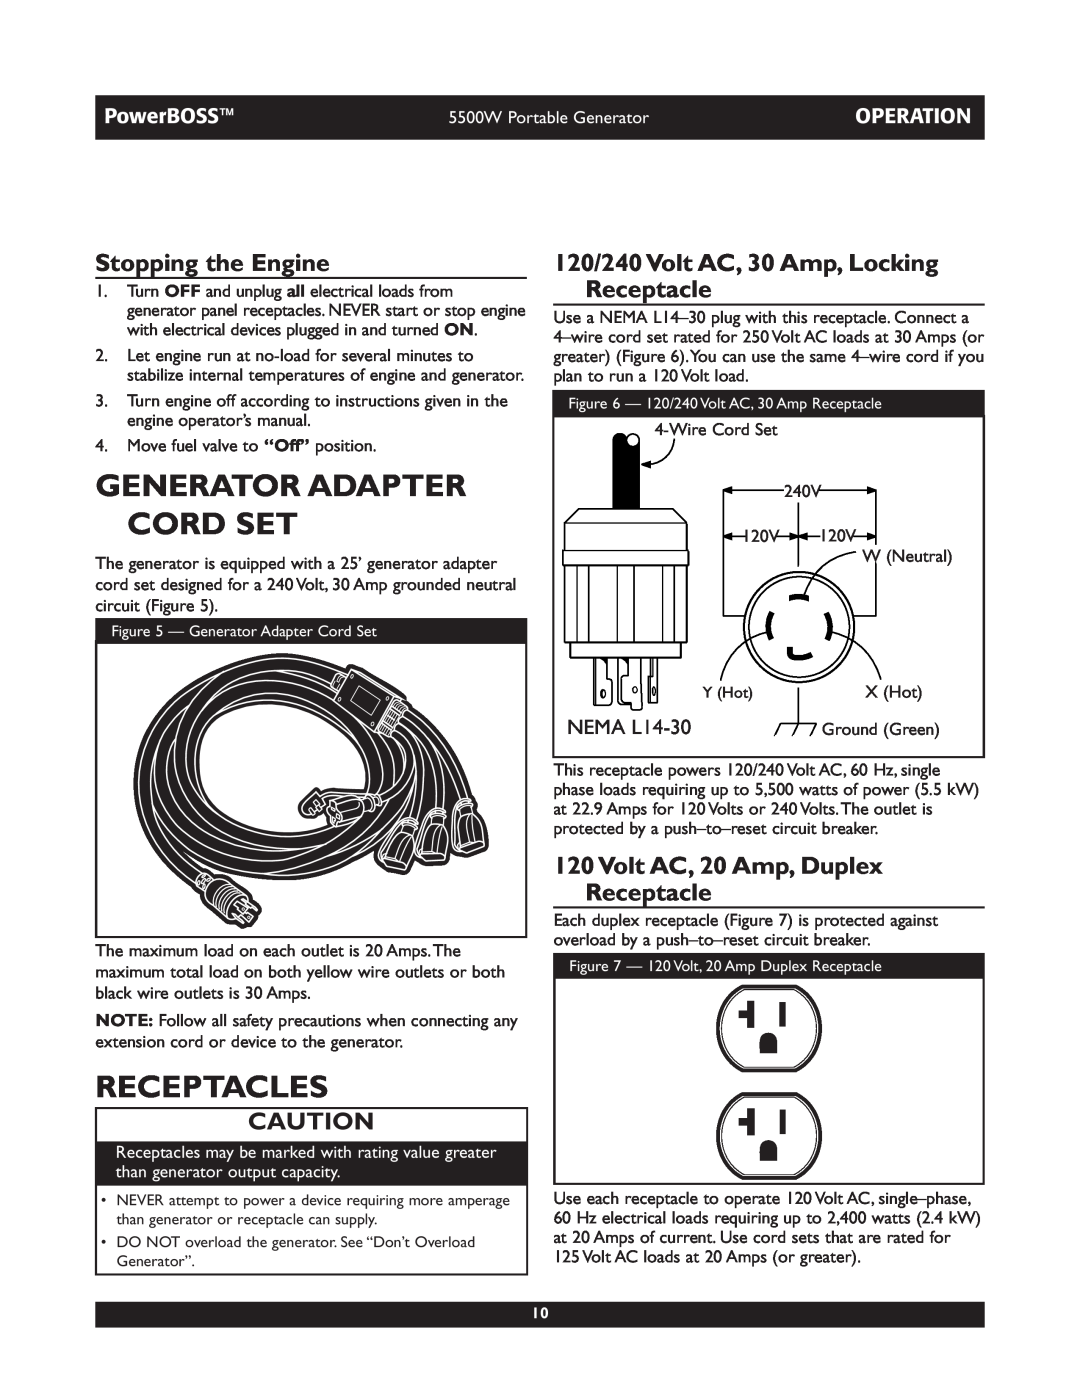 Briggs & Stratton 030249 Generator Adapter Cord Set, Receptacles, Stopping the Engine, Volt AC, 20 Amp, Duplex Receptacle 